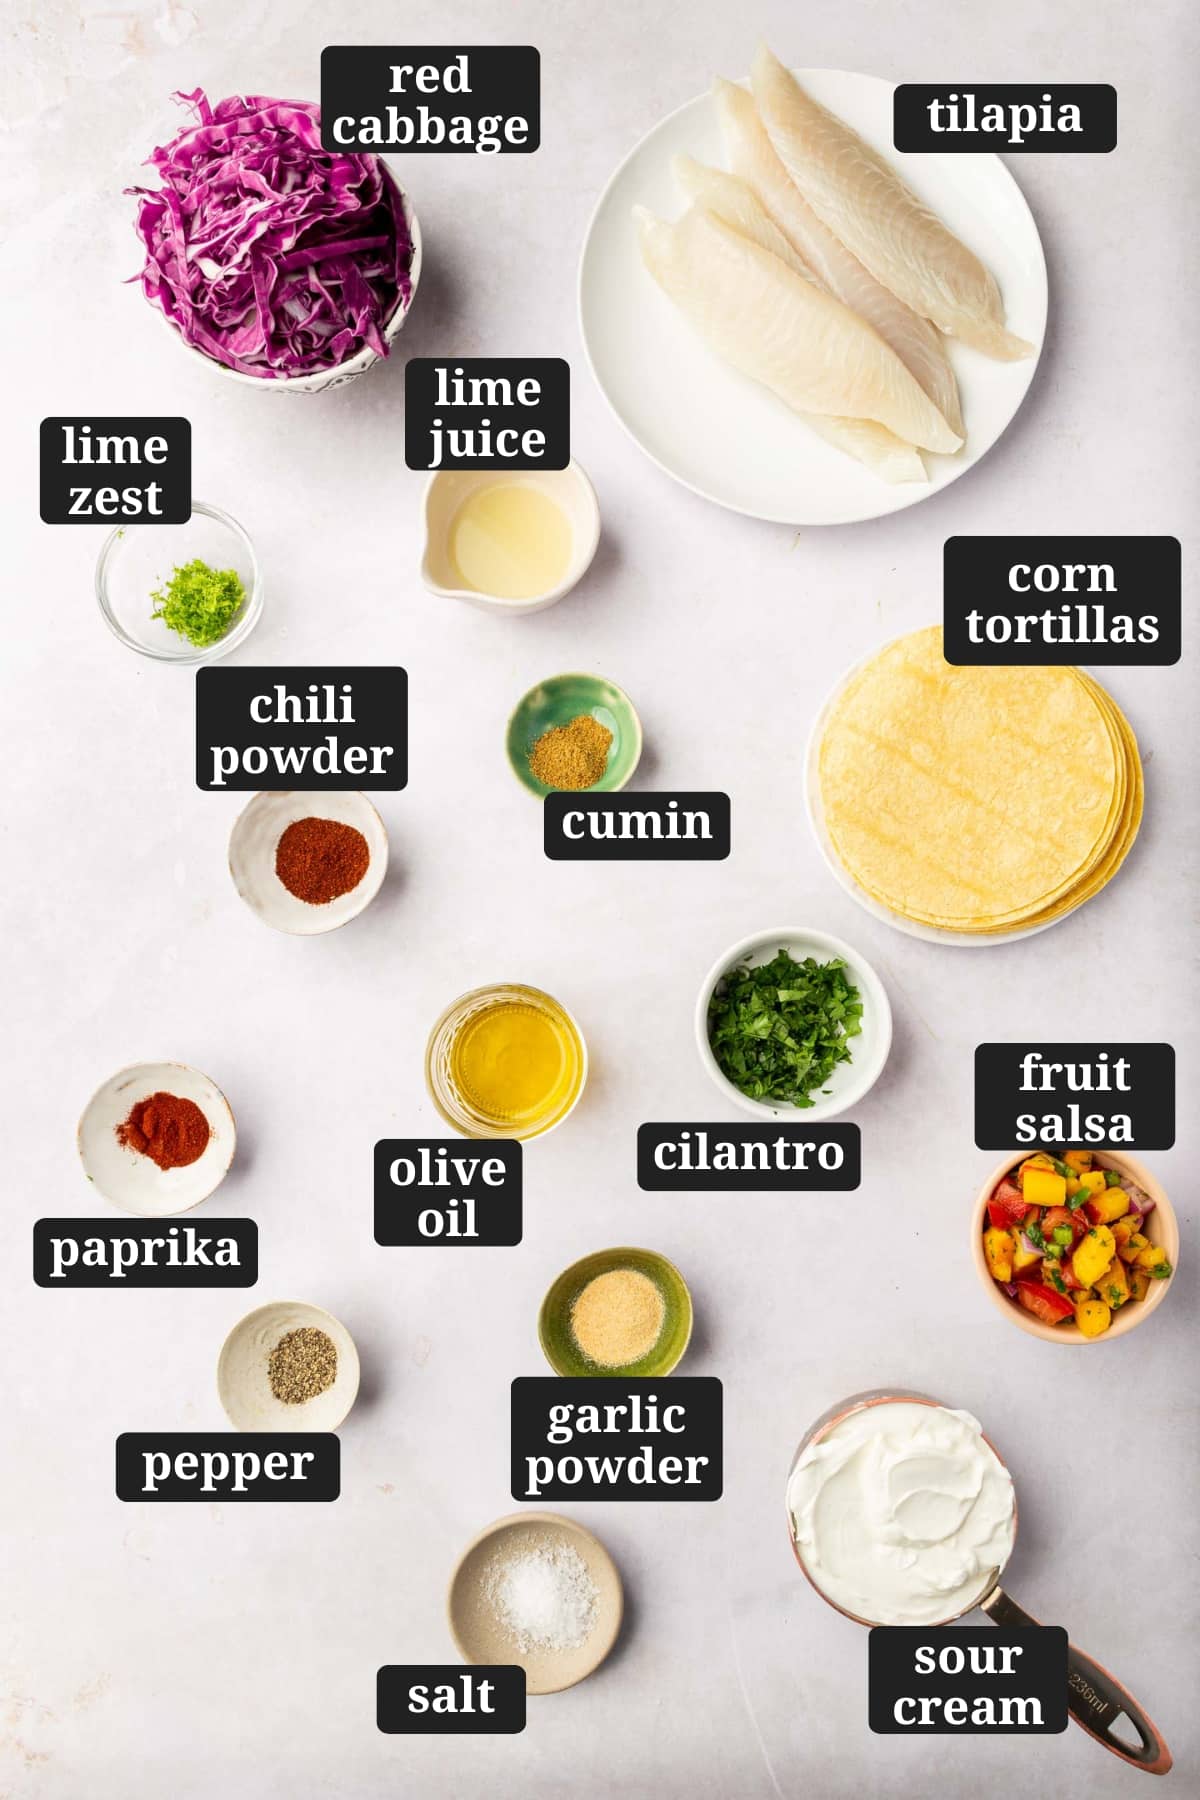 Ingredients in small bowls to make tilapia fish tacos, including red cabbage, raw tilapia filets, lime zest, lime juice, cumin, paprika, chili powder, olive oil, cilantro, corn tortillas, pepper, garlic powder, salt, sour cream, and fruit salsa with text overlays over each ingredient.